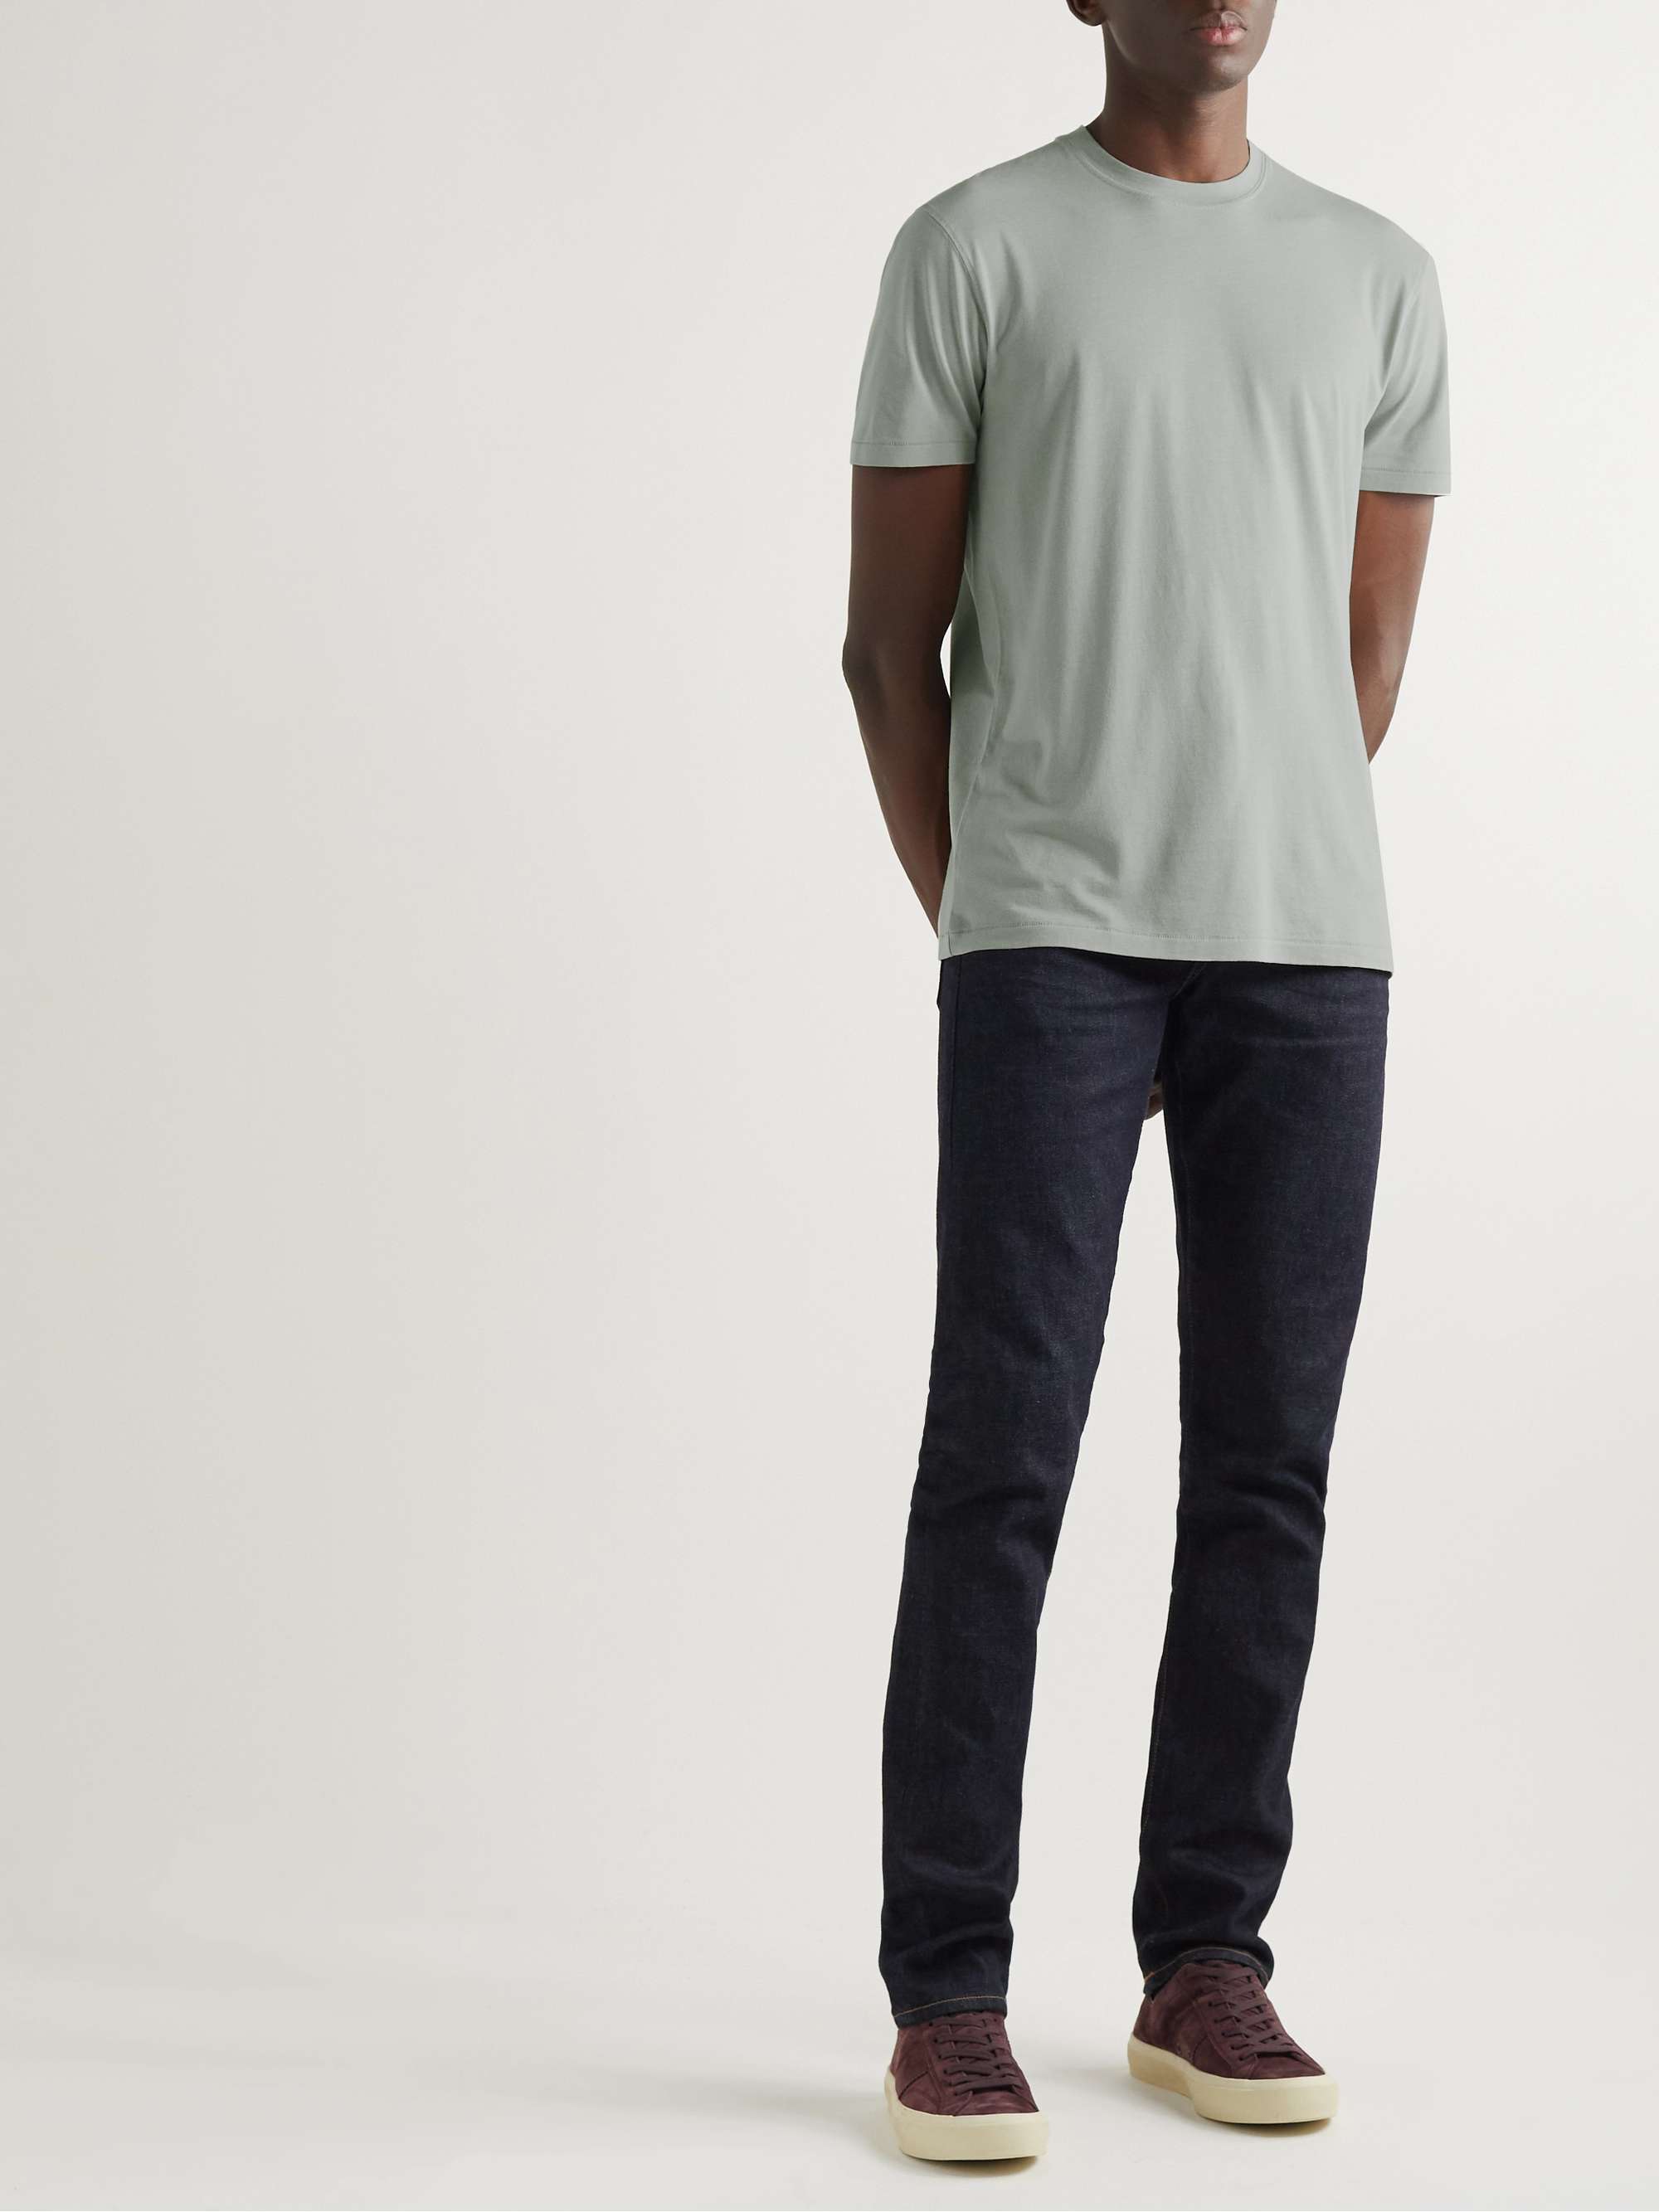 TOM FORD Lyocell and Cotton-Blend Jersey T-Shirt